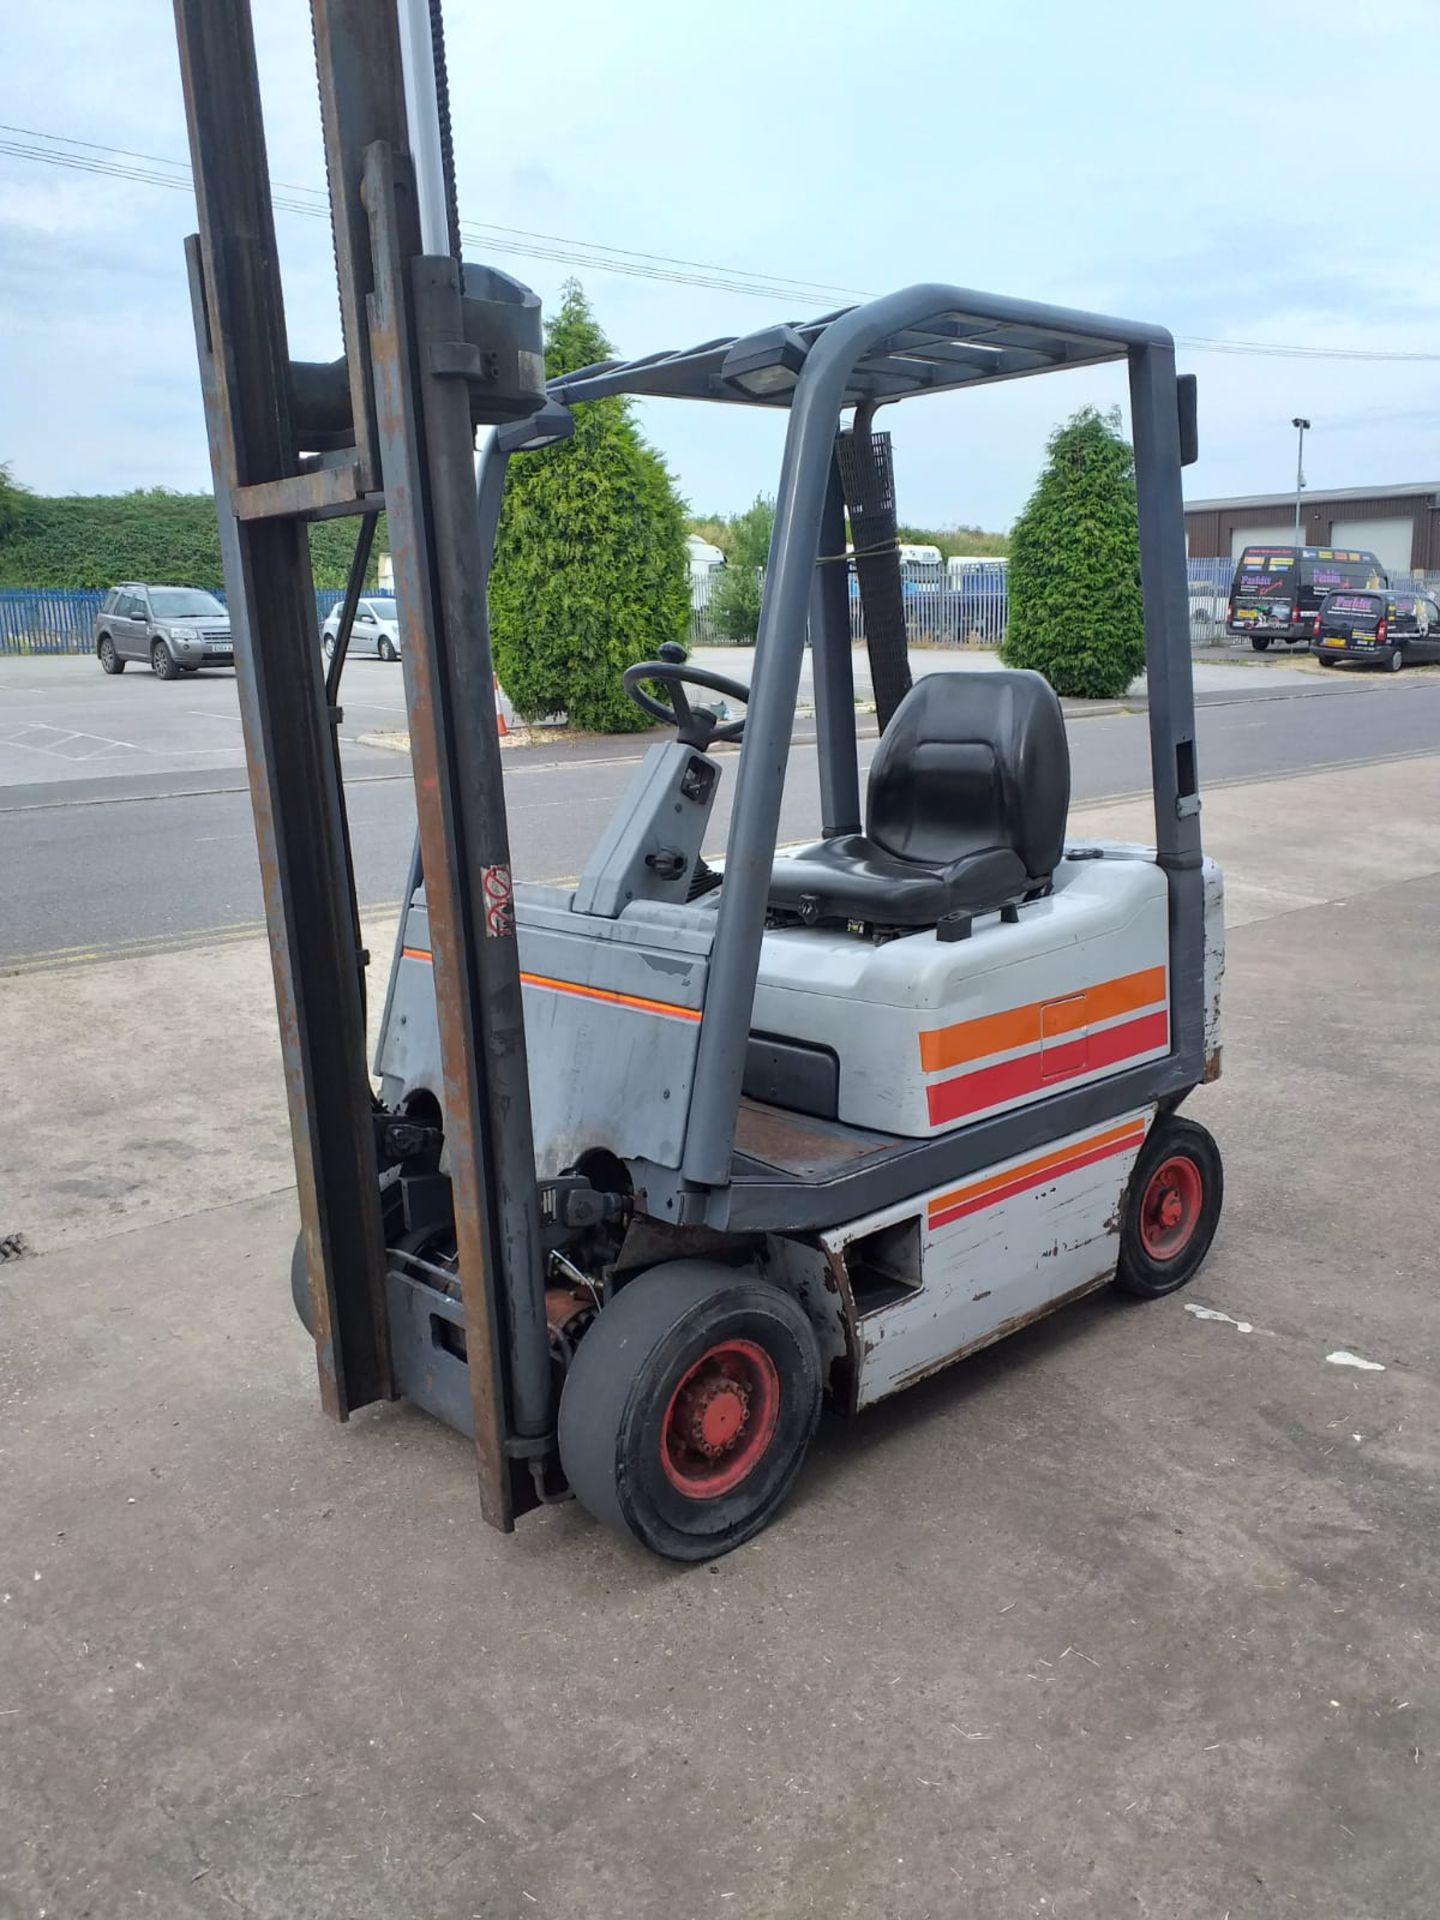 1995 FIAT D15 DIESEL 1.5 TON FORKLIFT DUPLEX MAST WITH SIDE SHIFT, RUNS, WORKS AND LIFTS *NO VAT* - Image 3 of 7